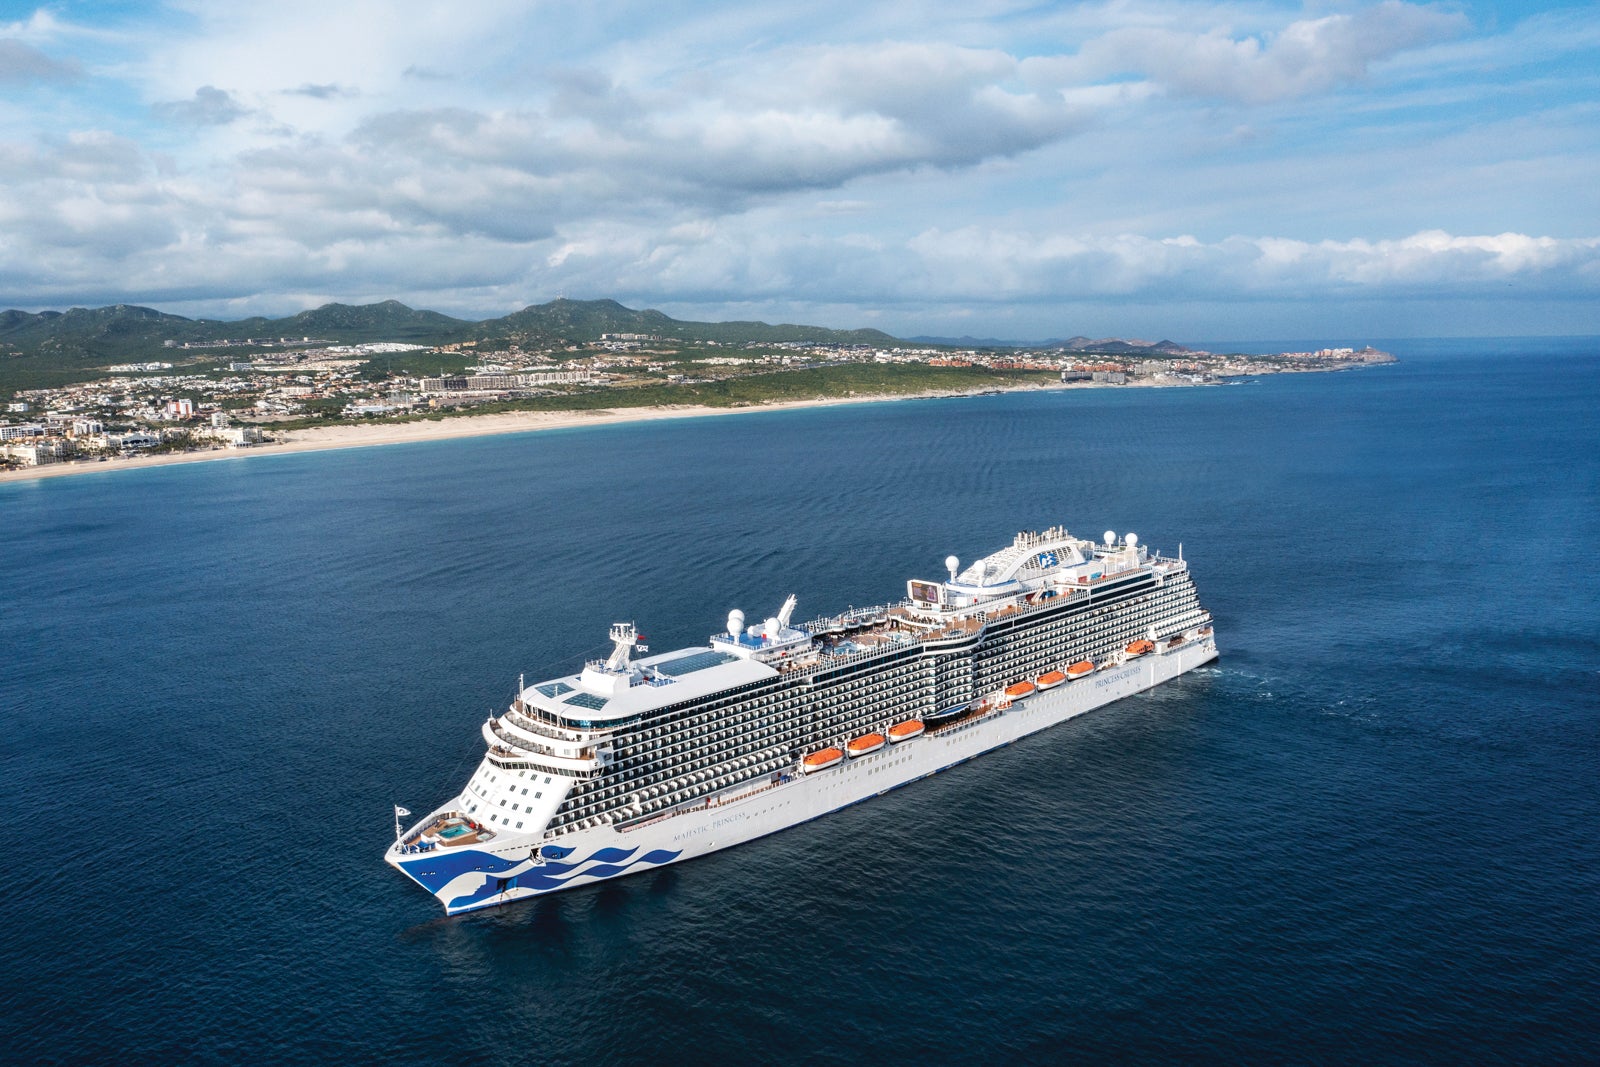 This cruise offer could earn you elite status 4 times faster